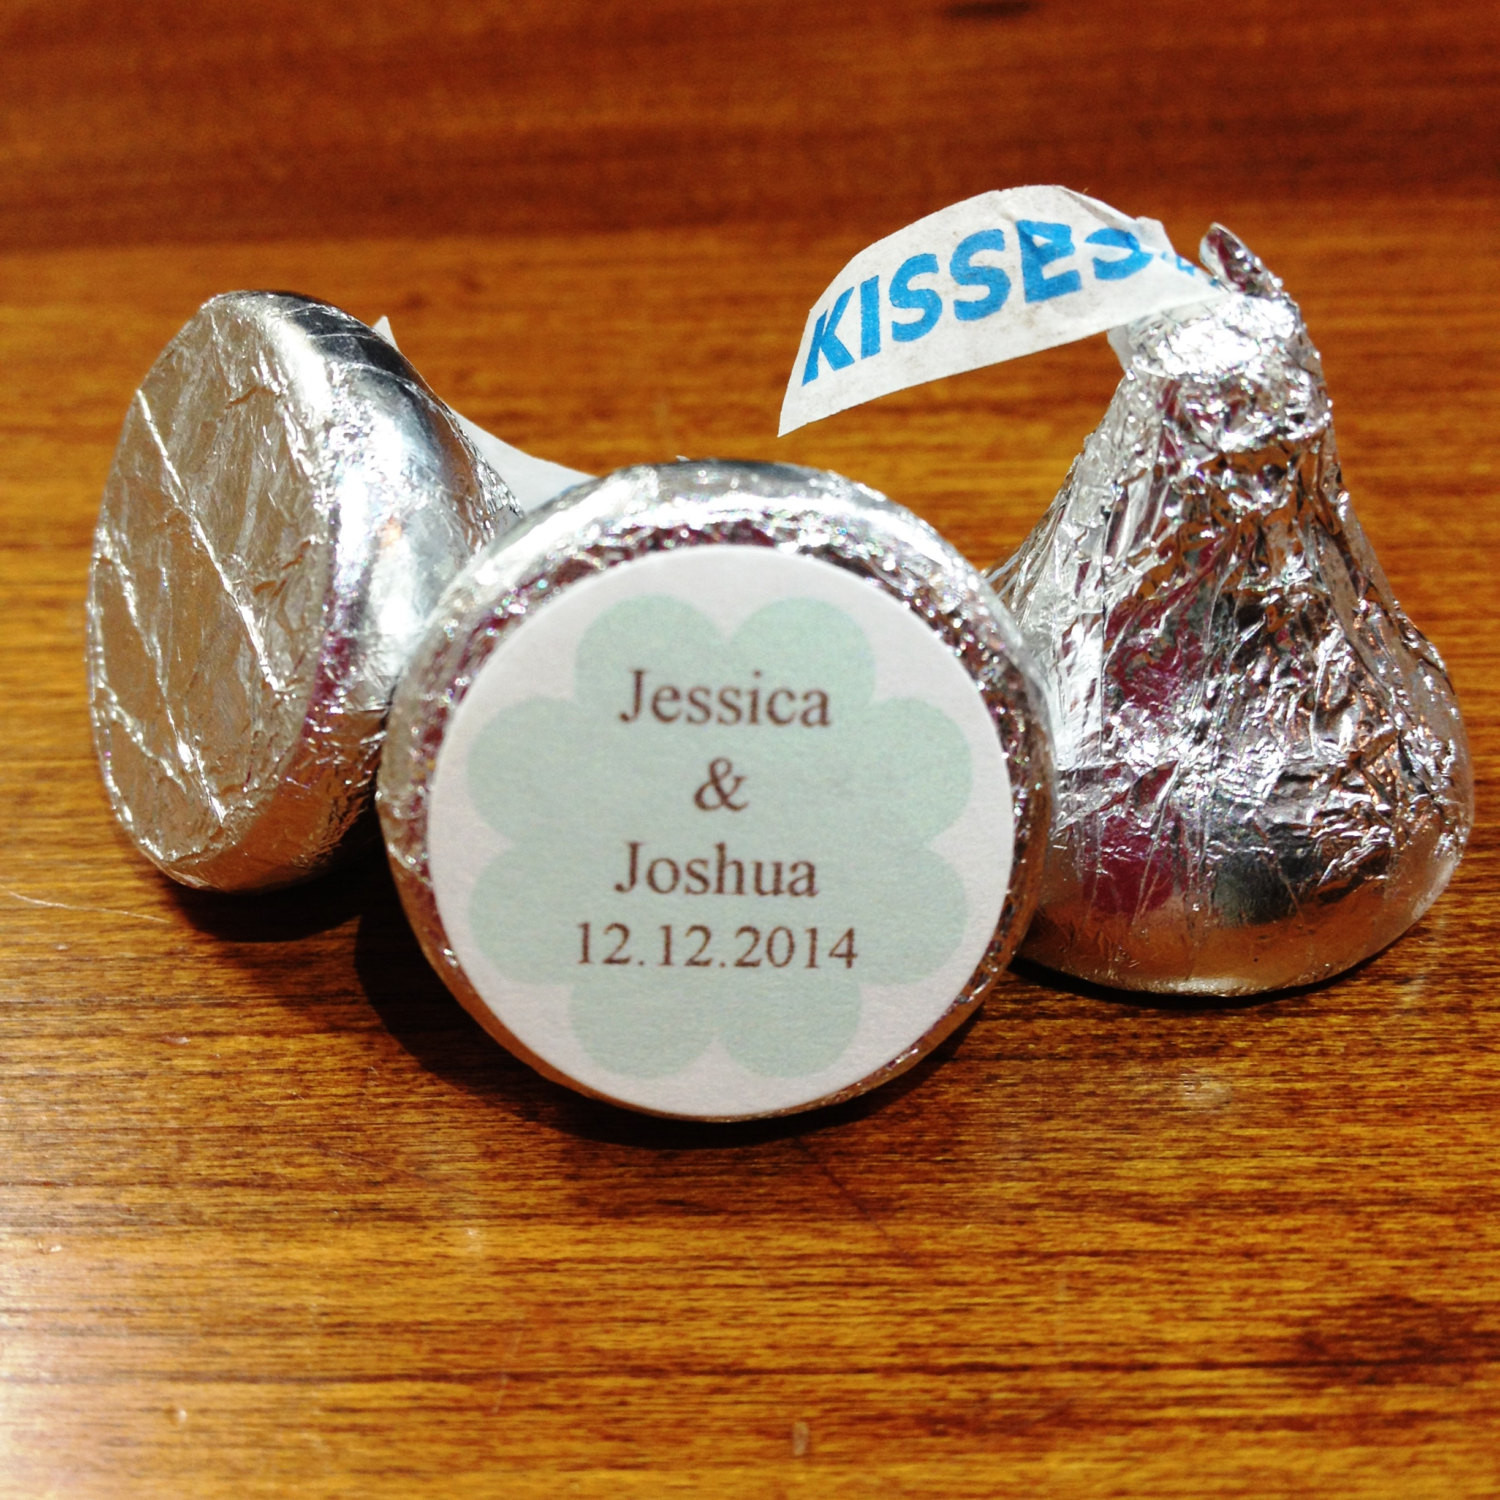 Hershey Kisses Wedding Favors
 1 2 order Hershey Kiss Wedding Favor Stickers with a colored